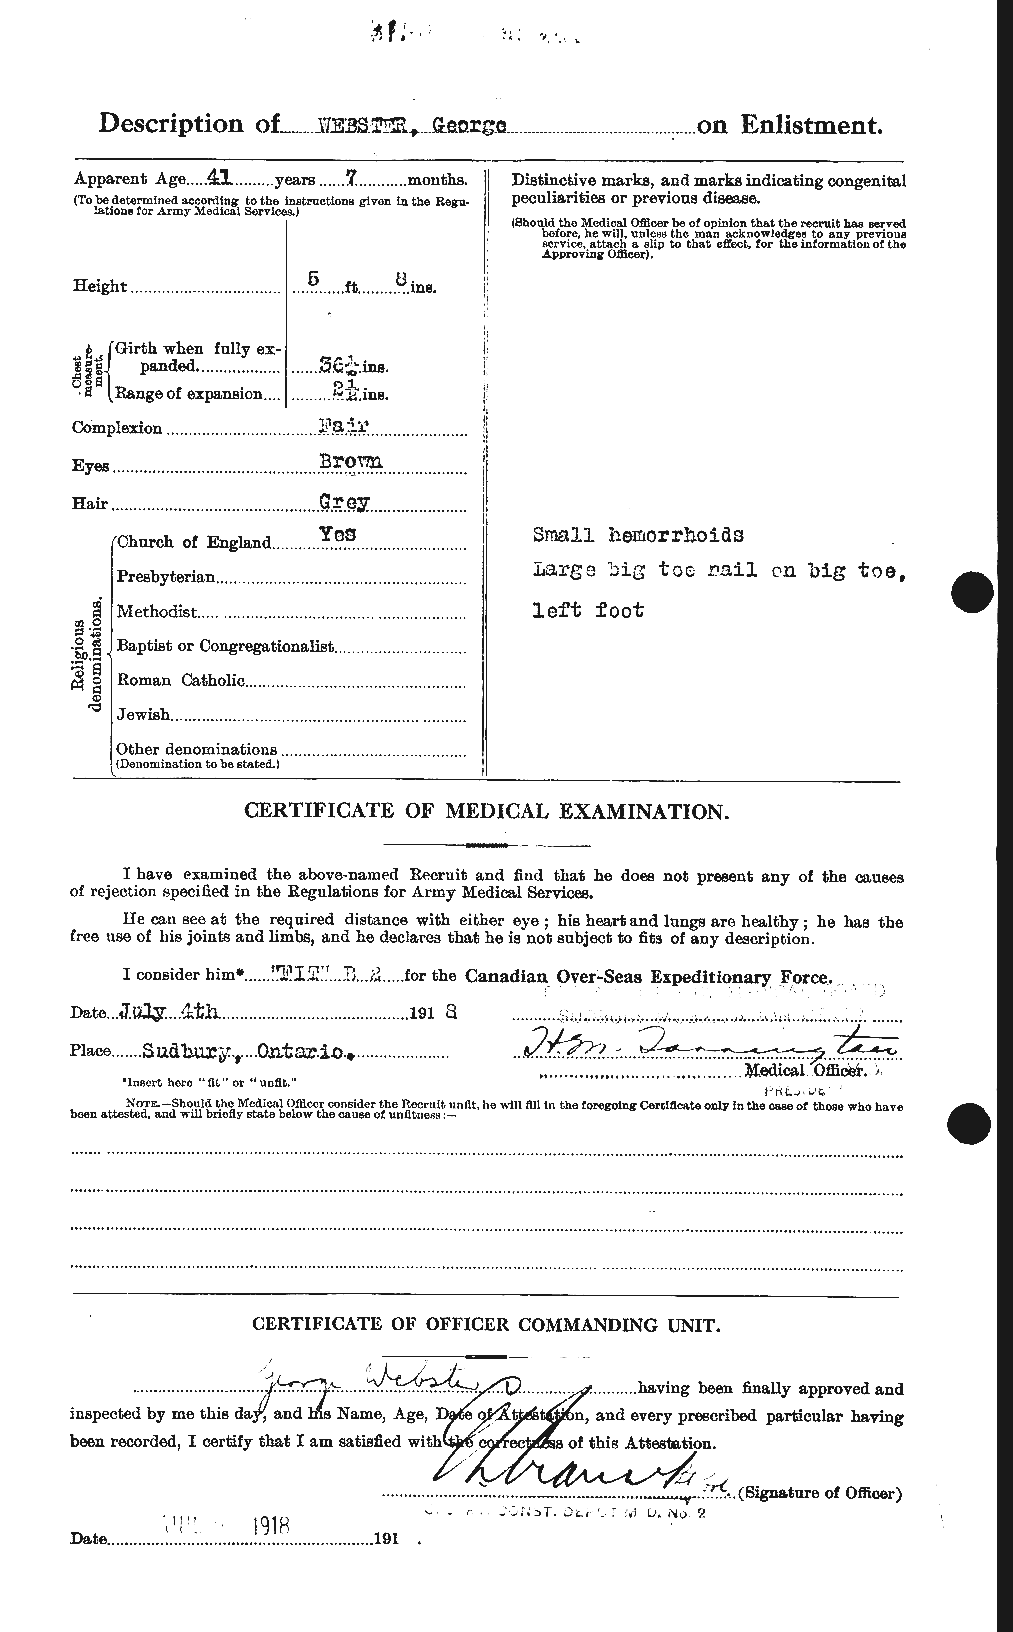 Personnel Records of the First World War - CEF 670379b